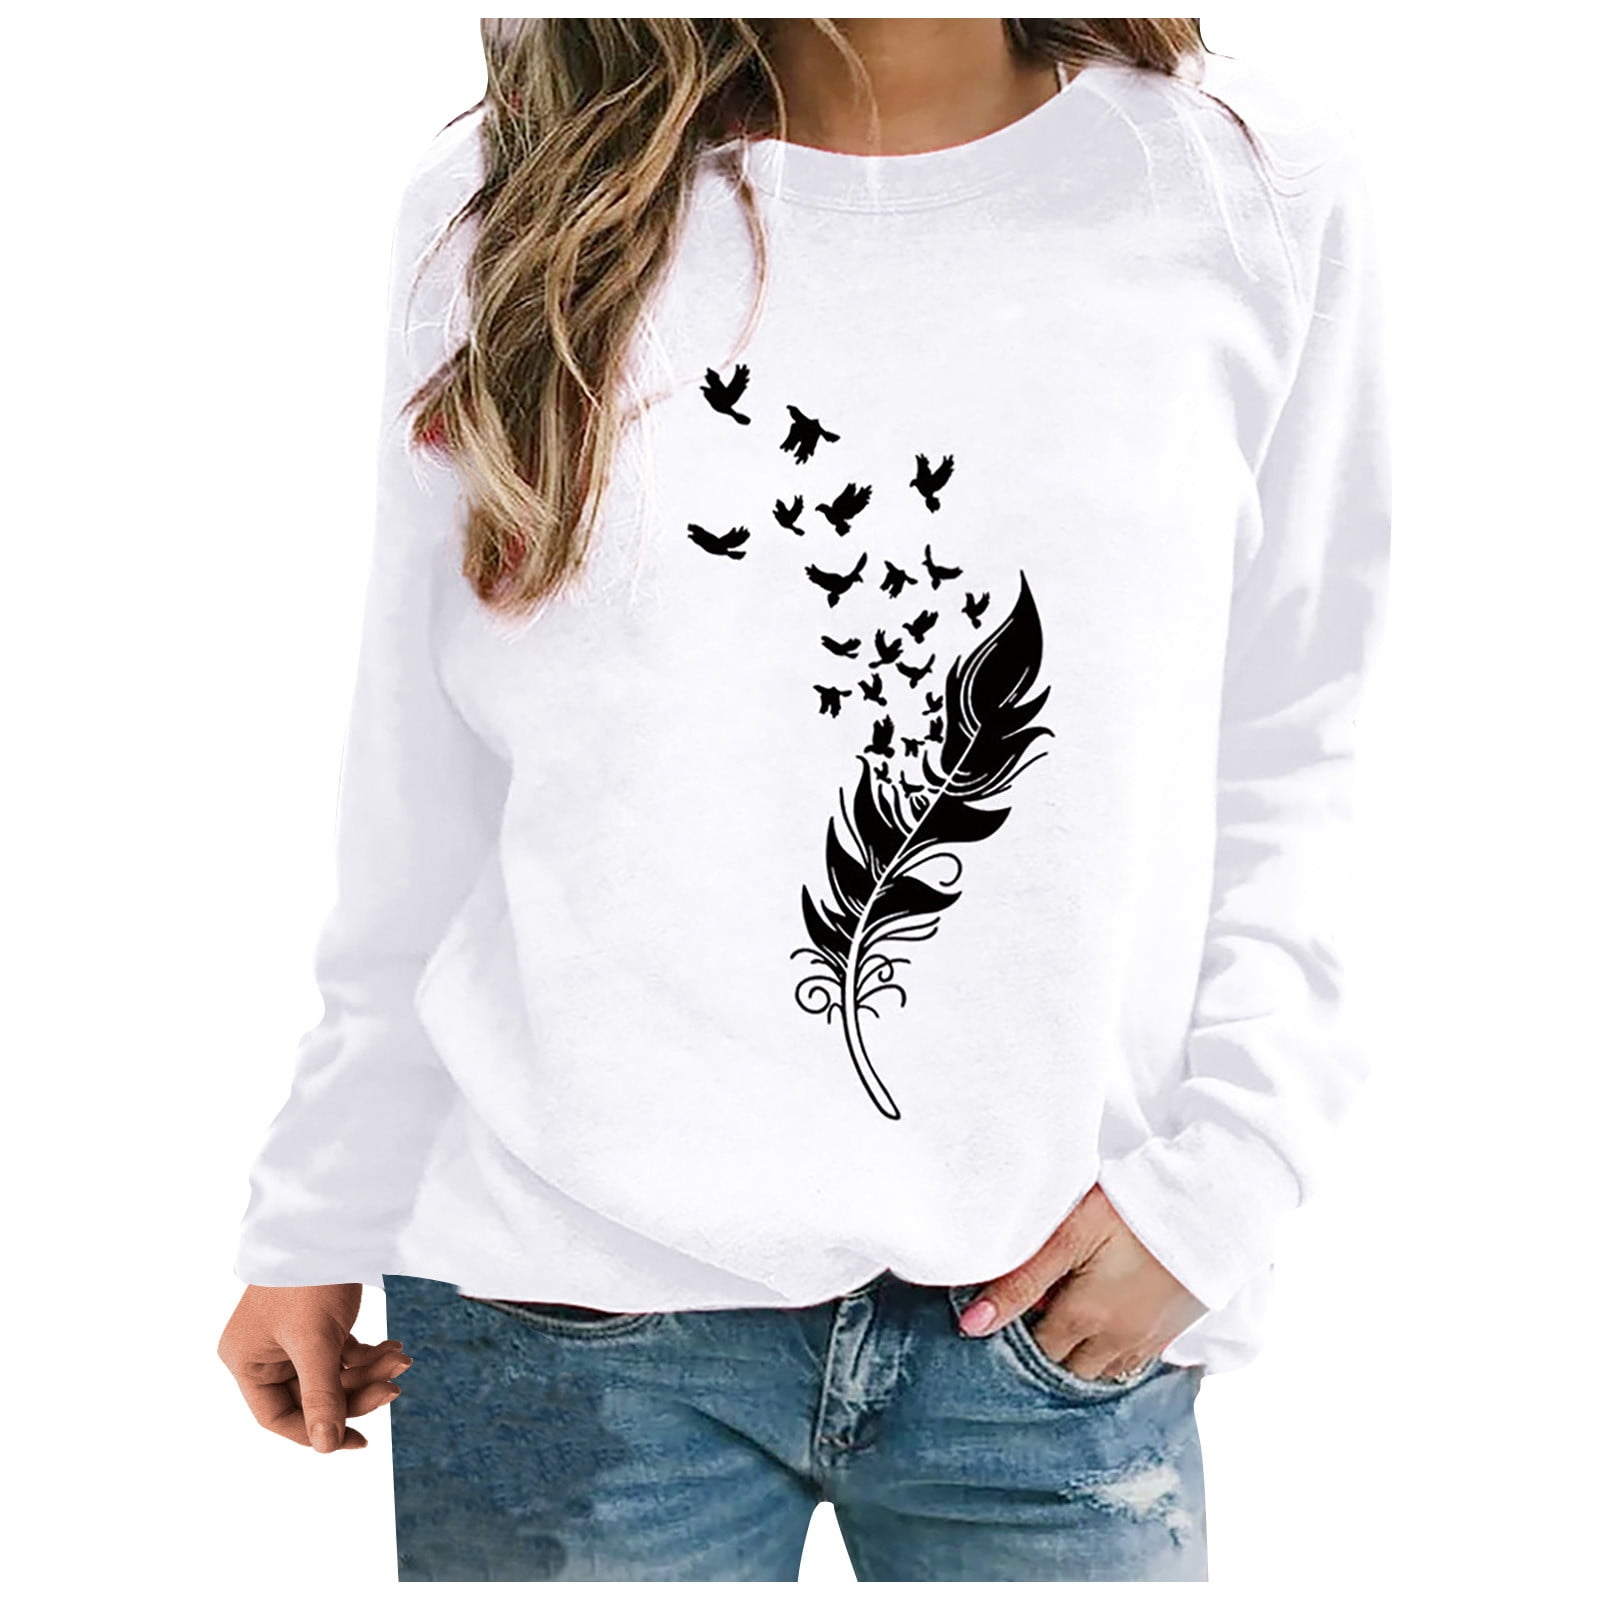 Pullover Tops for Women Heart Floral Feather Print Tee Shirt Sweatshirts Long Sleeve Crewneck Casual Tunic Blouse 